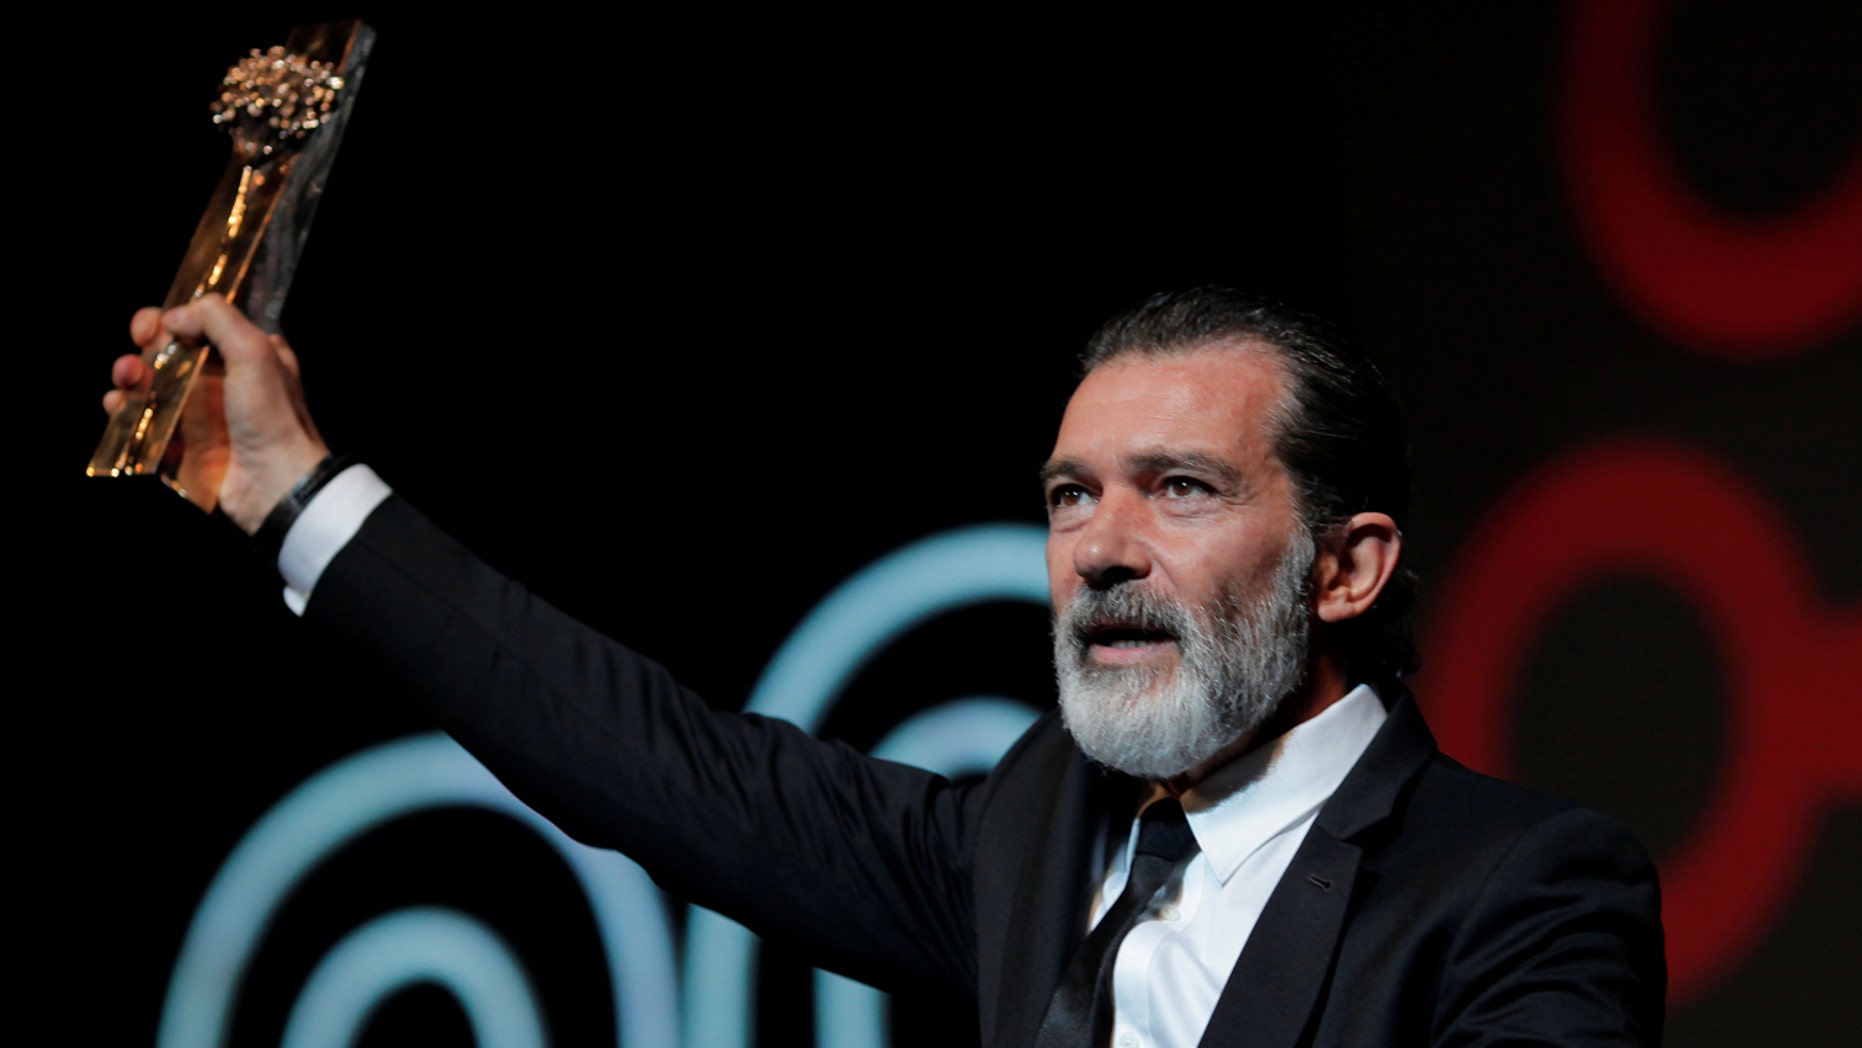 Antonio Banderas says he's recovered from heart attack | Fox News